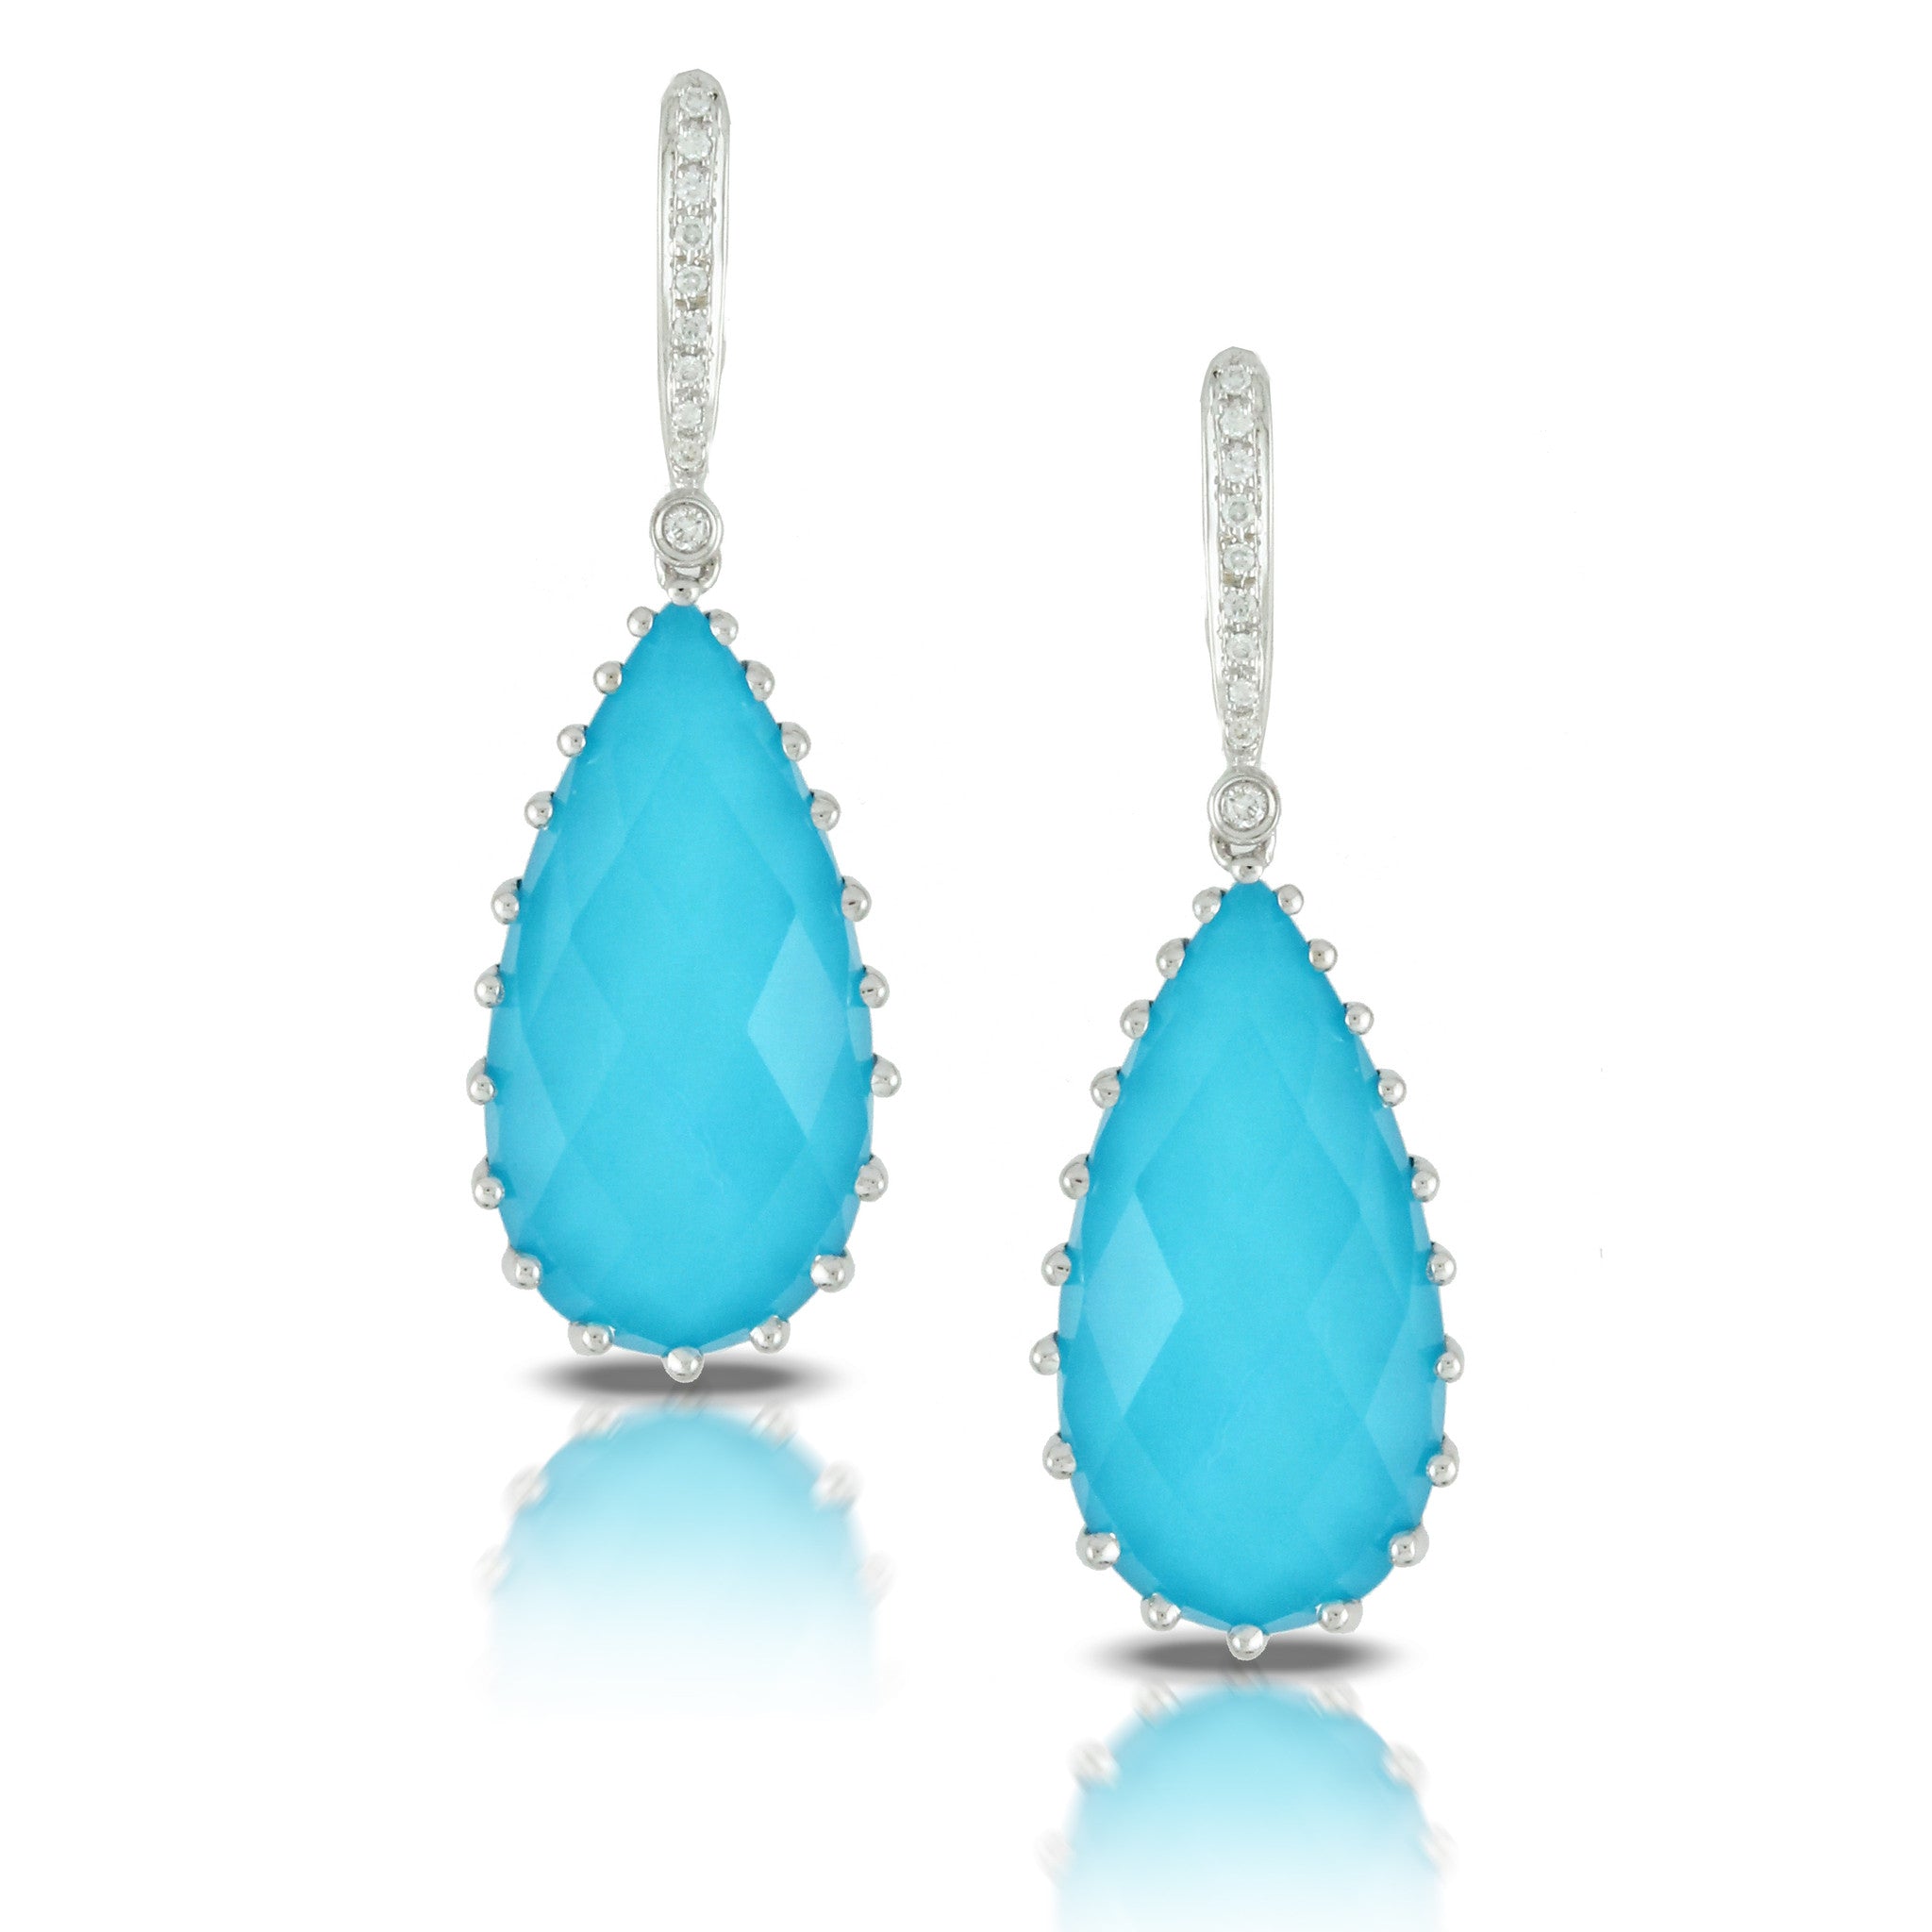 Doves St Barth's Blue 18k White Gold Earrings with Blue Turquoise, White Topaz, and Pave Diamonds